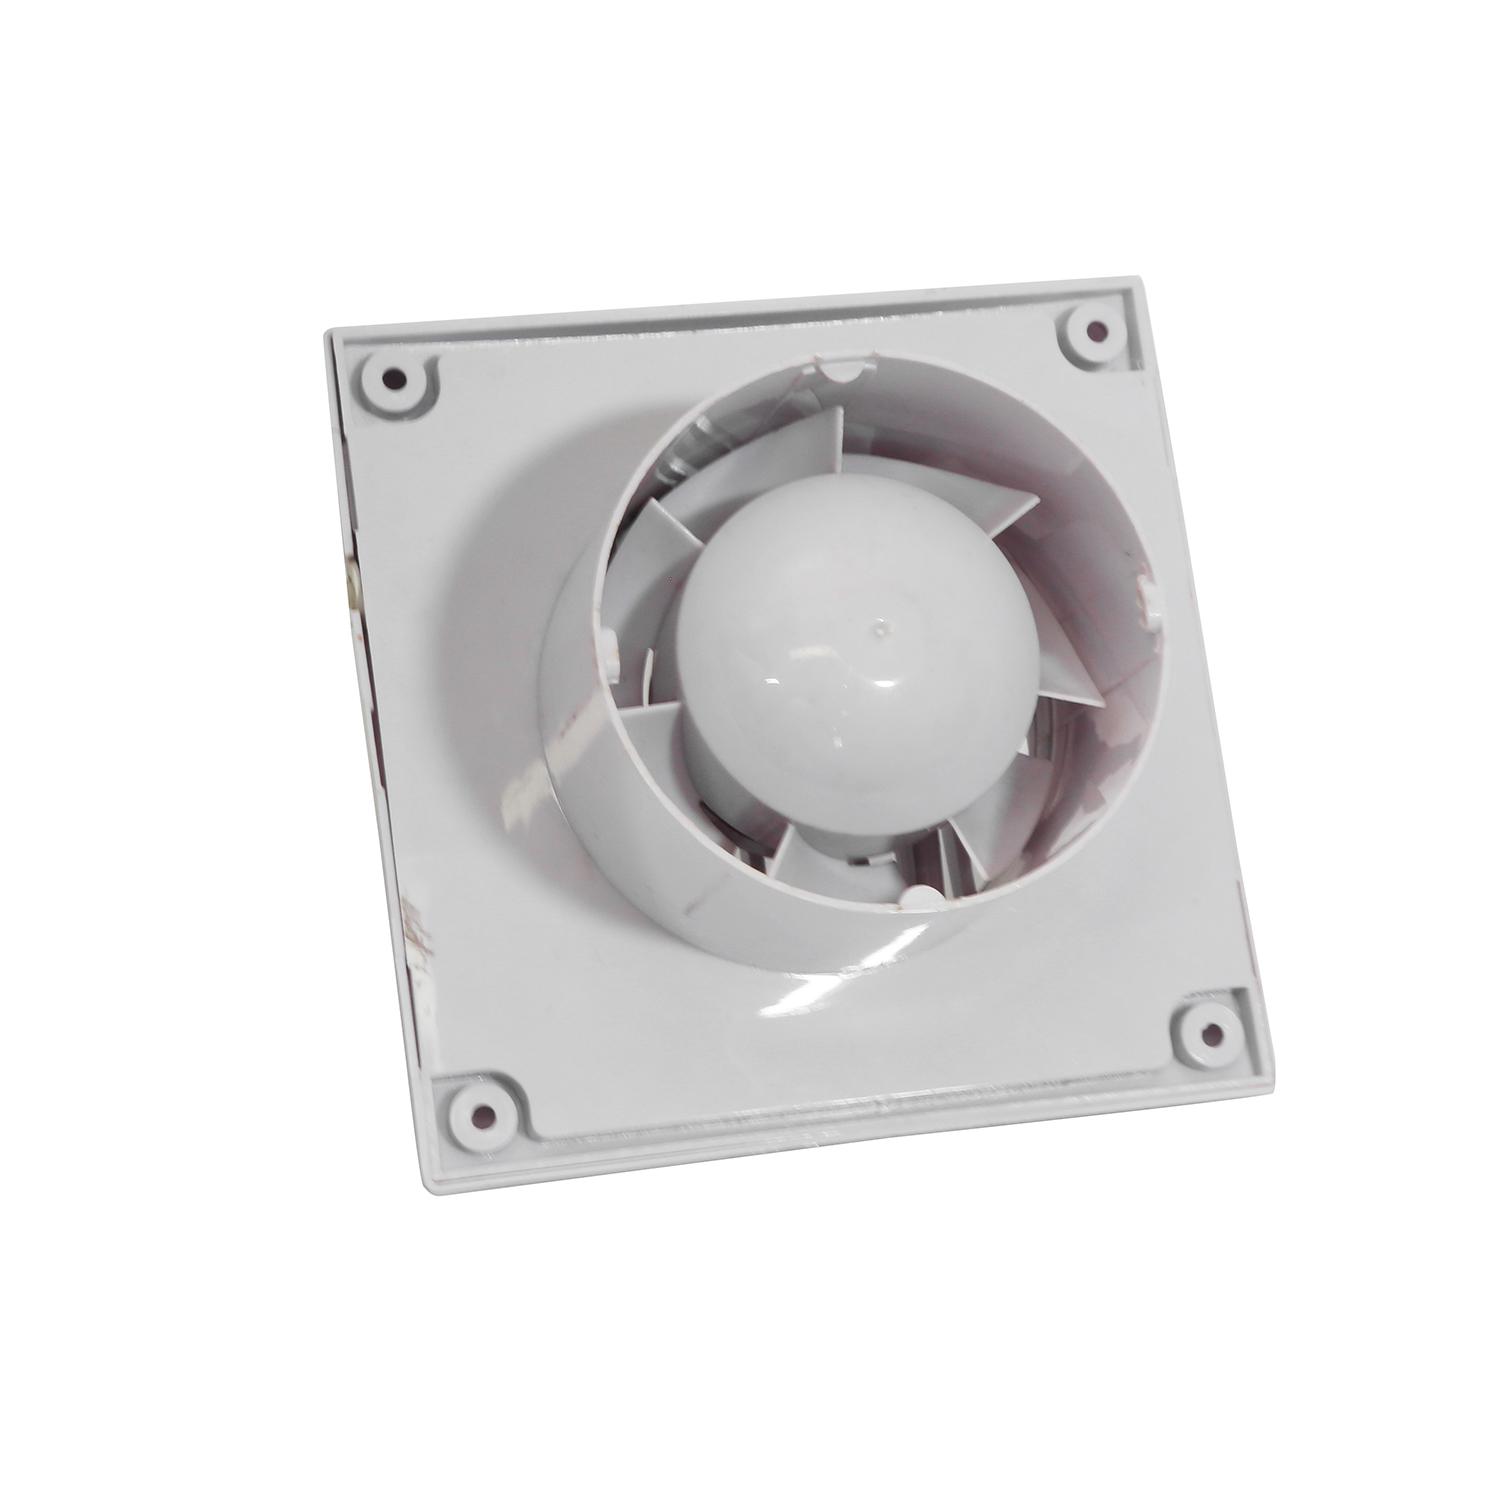 Ventilation Exhaust Fan for Whole House Small Window Wall Mount Smoking Room